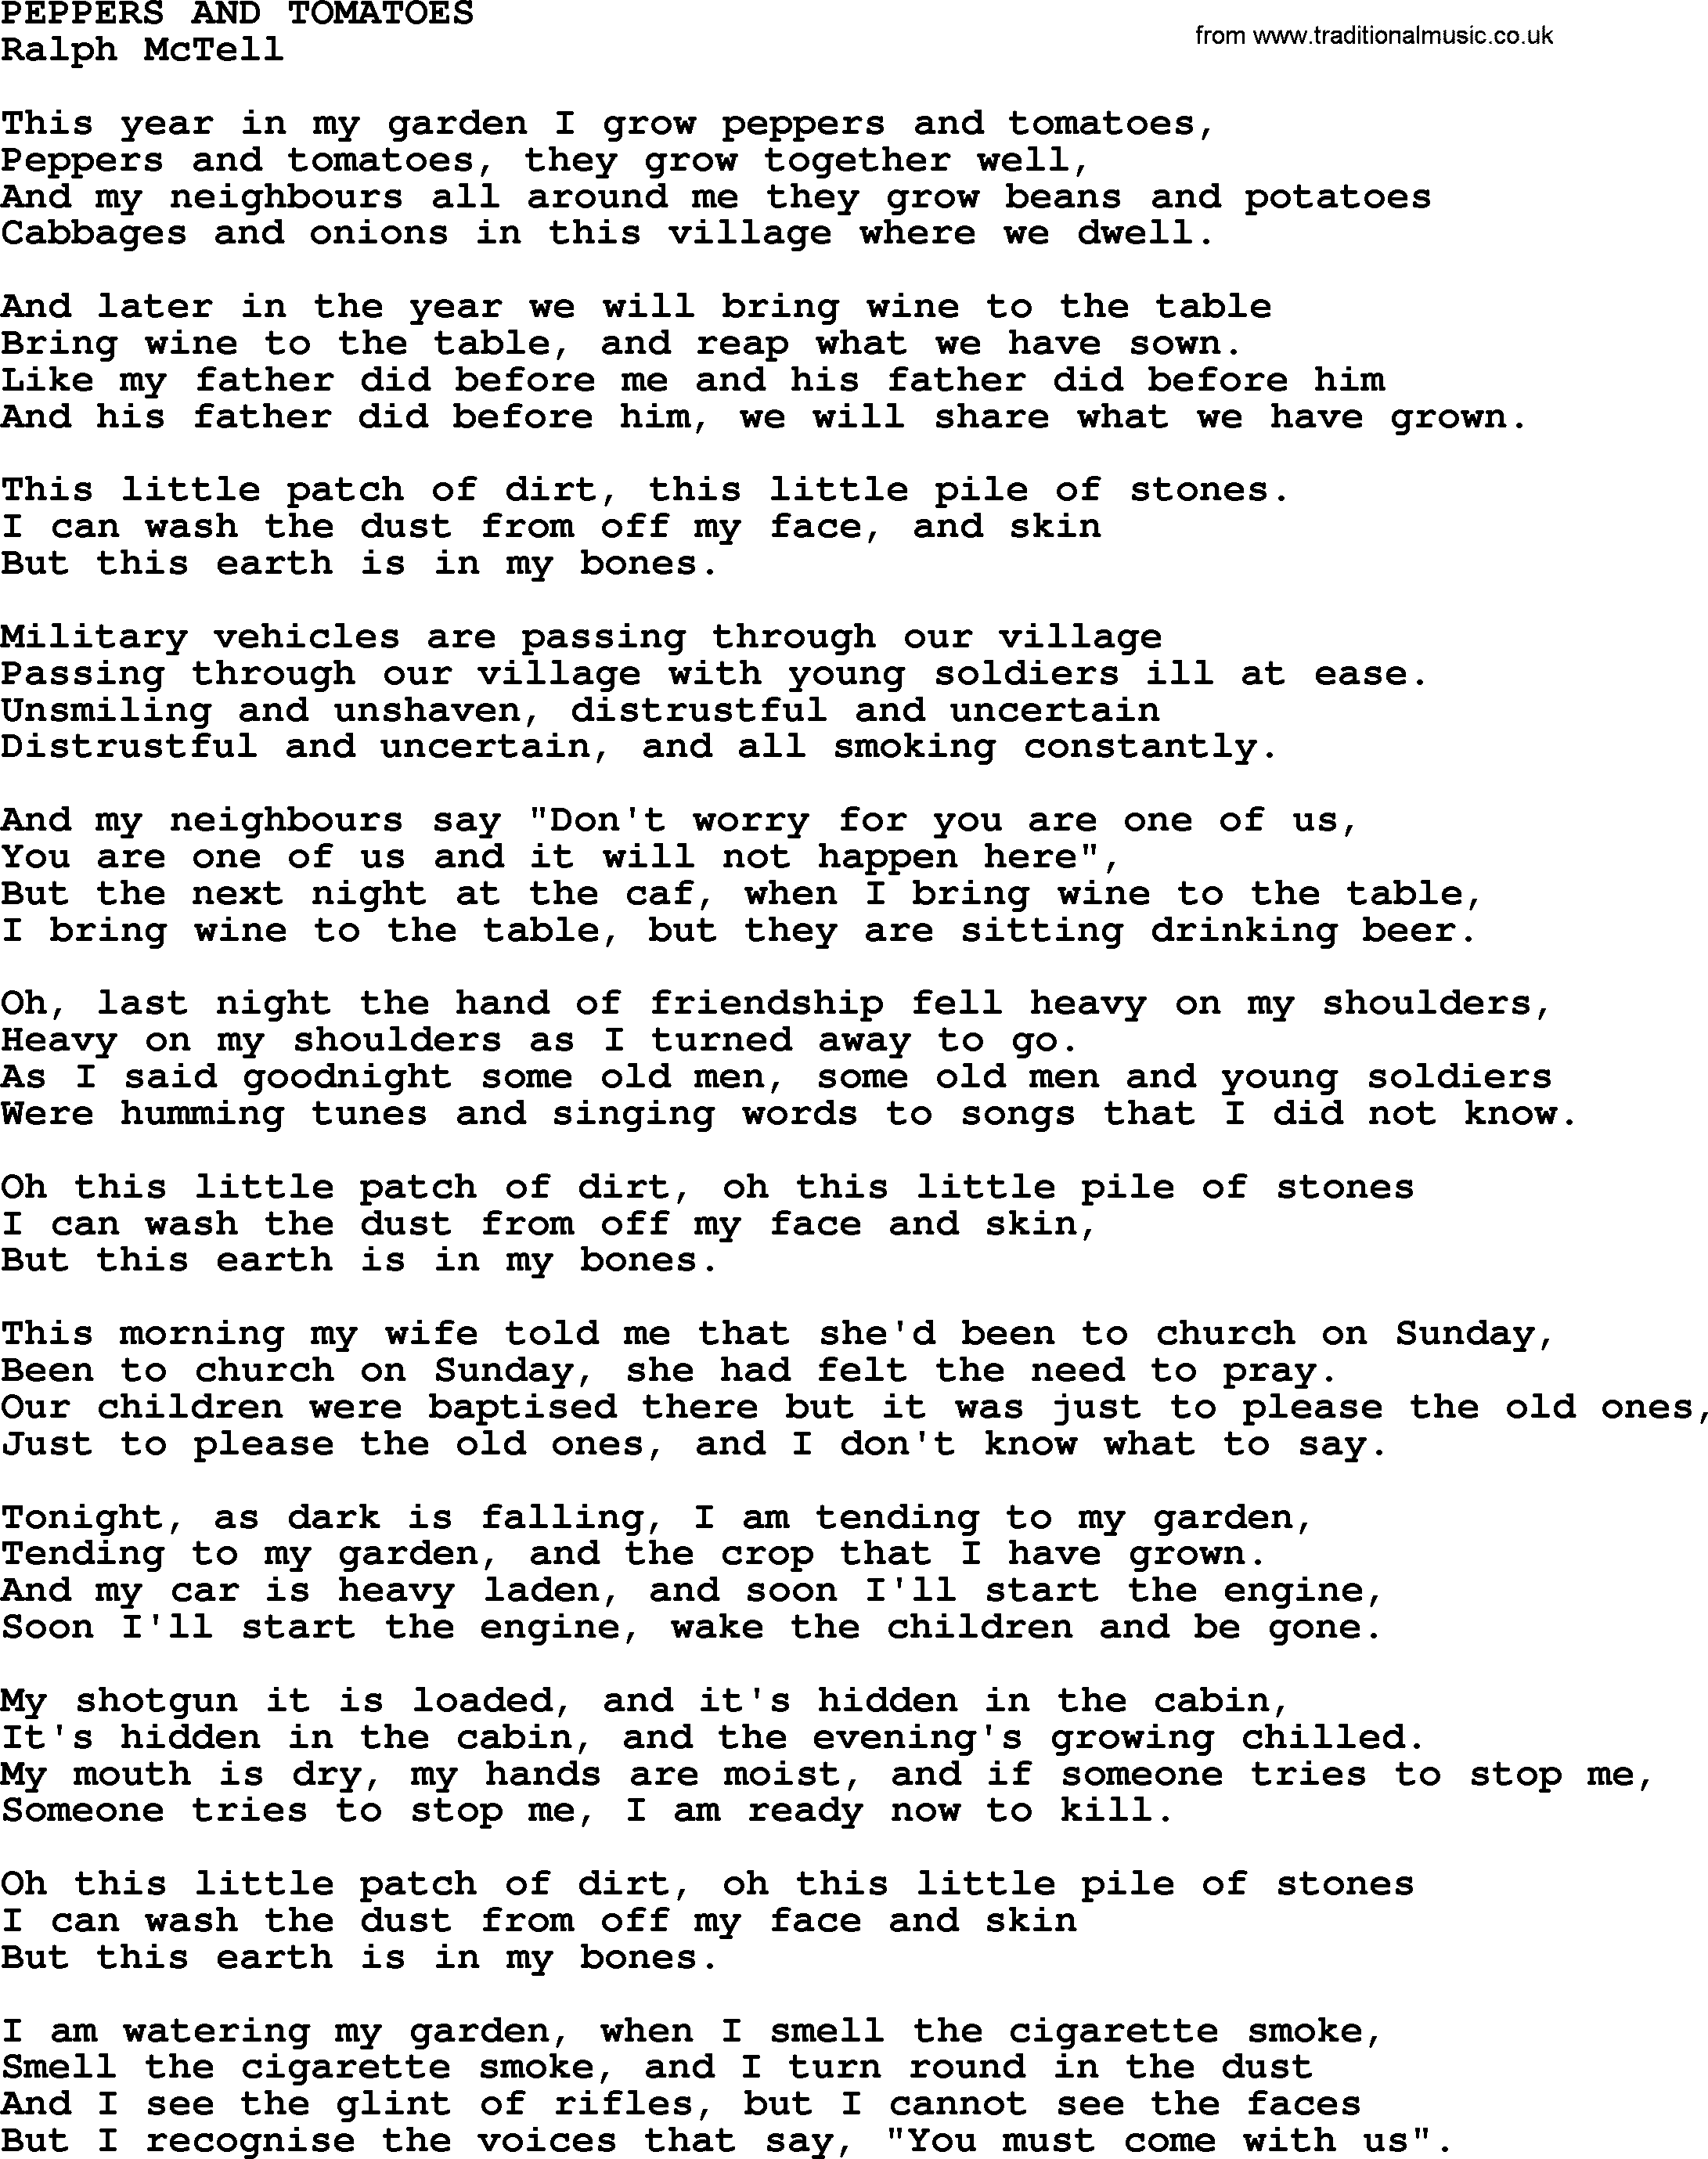 Peppers And Tomatoes Txt By Ralph Mctell Lyrics And Chords